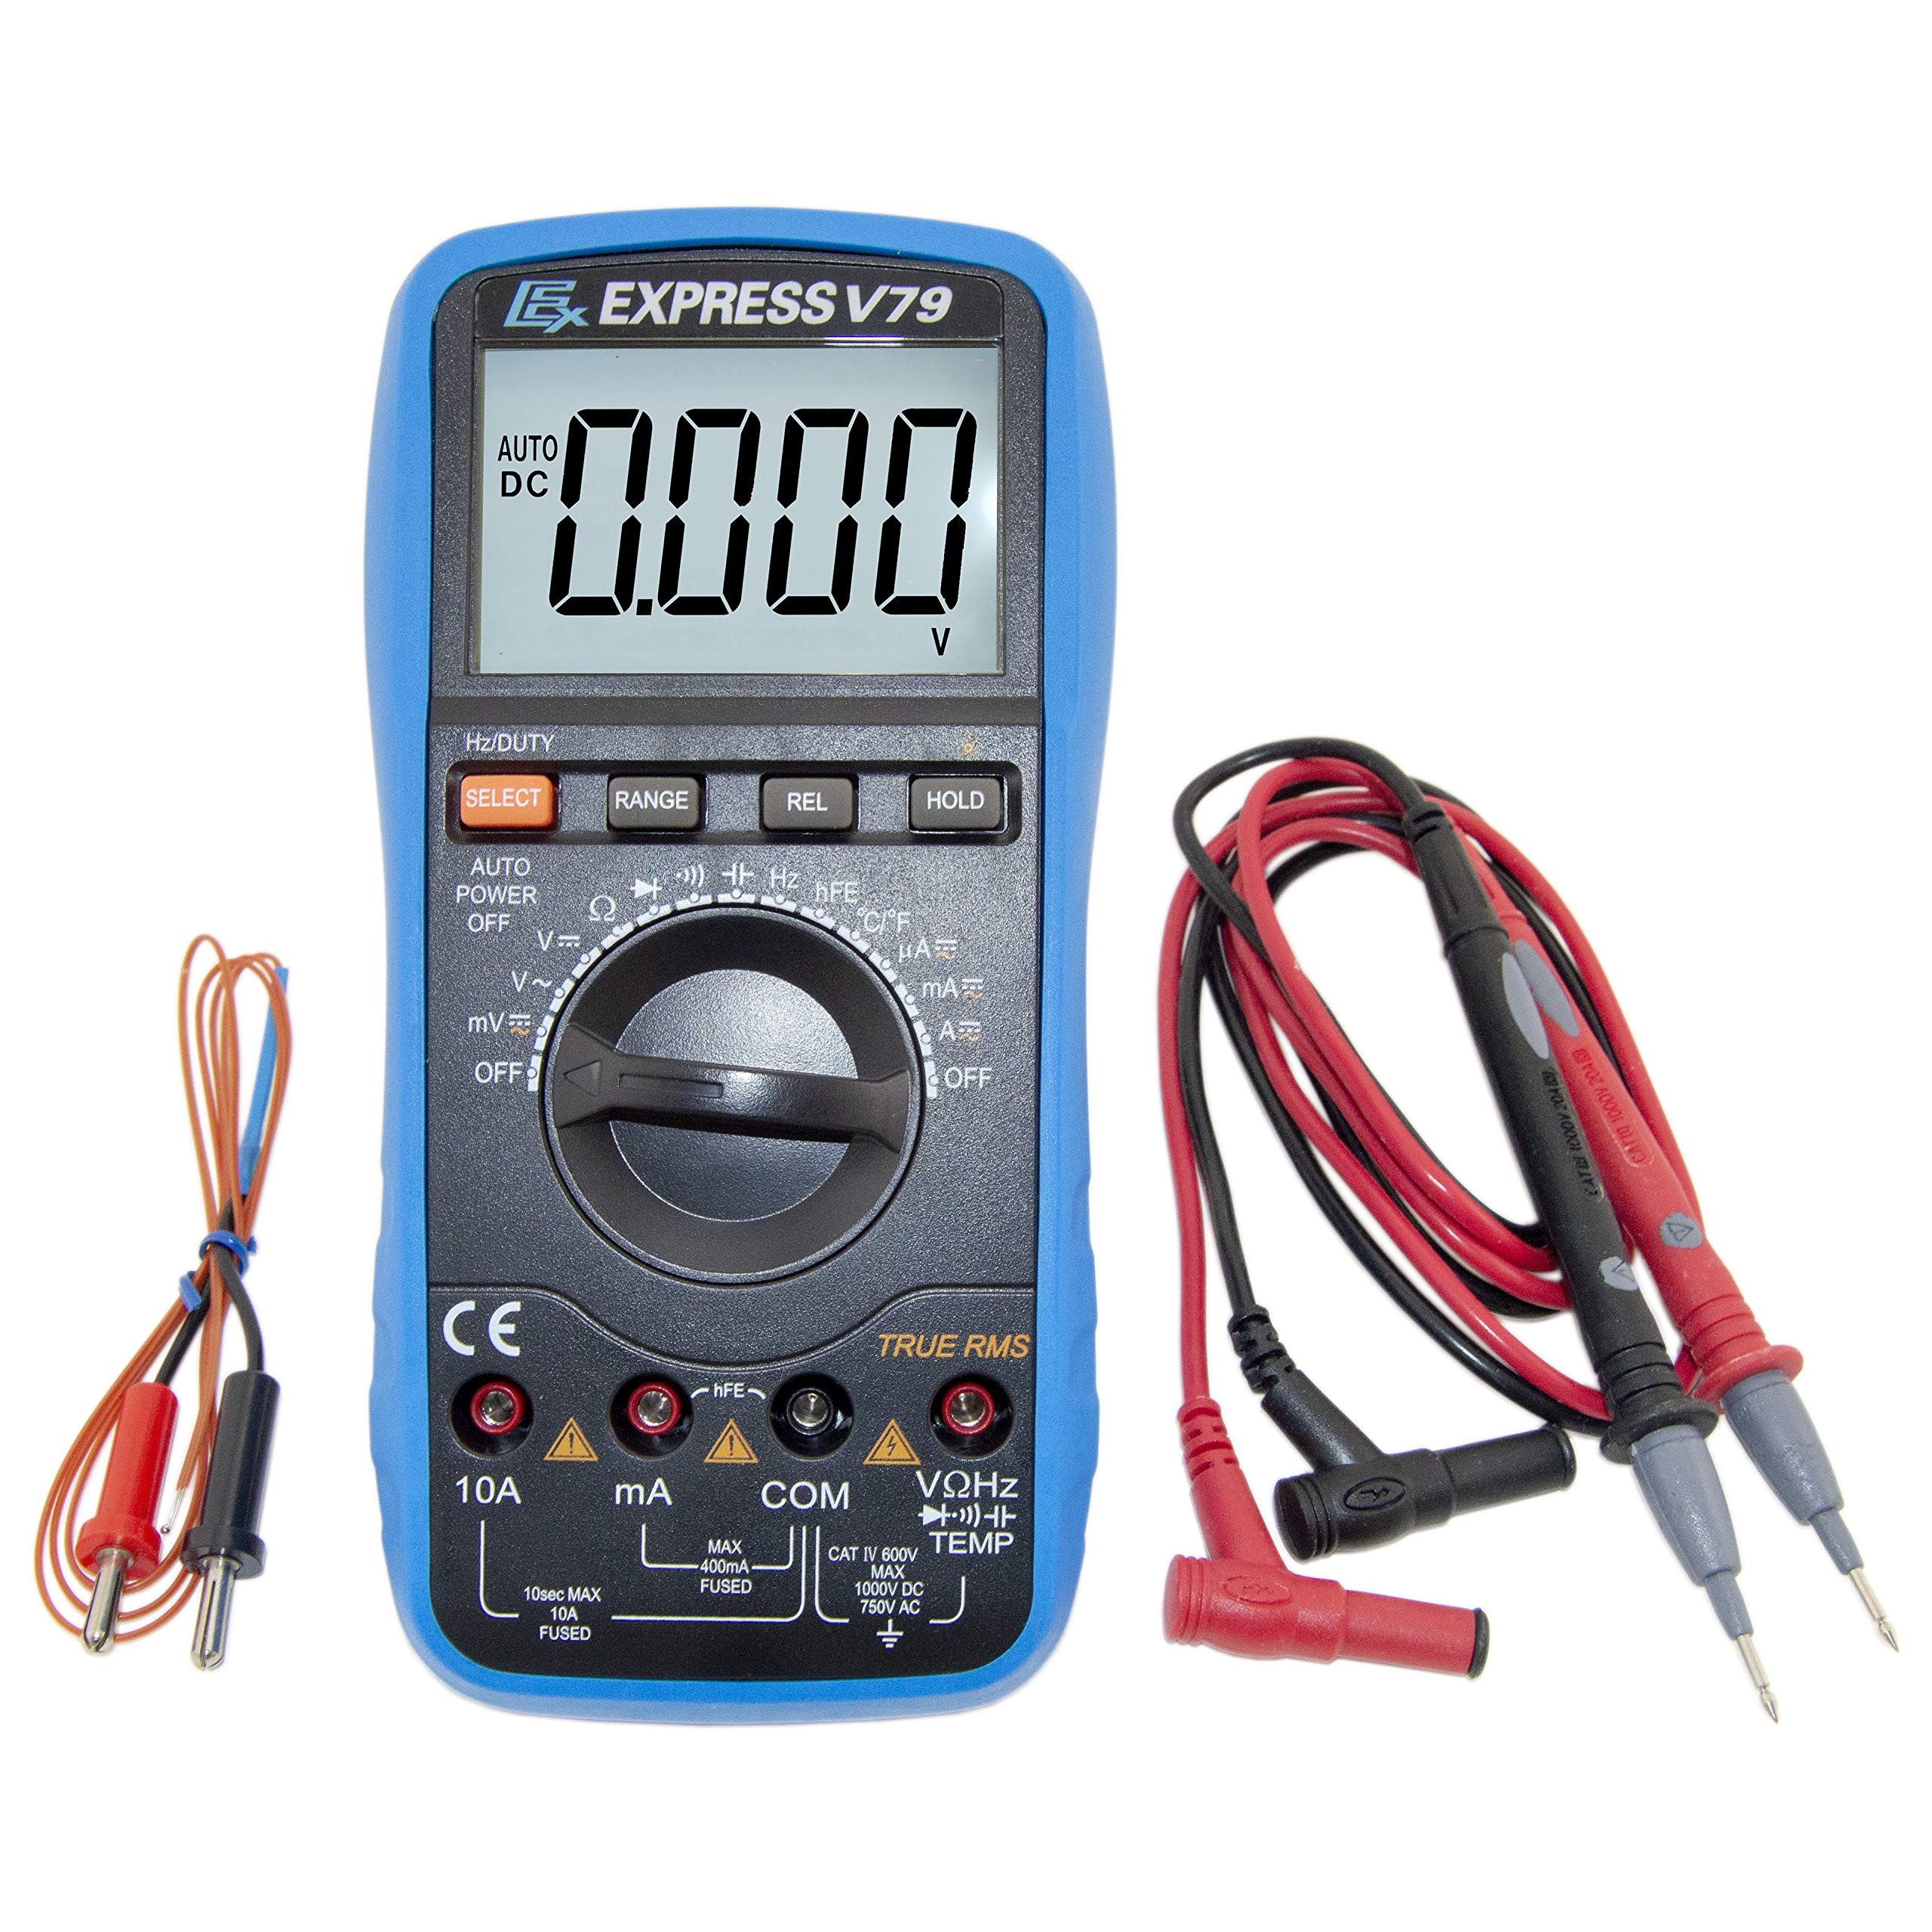 EX ELECTRONIX EXPRES V79 Backlit Auto Ranging True RMS Digital Multimeter with Thermometer by EX ELEcTRONIX EXPRESS